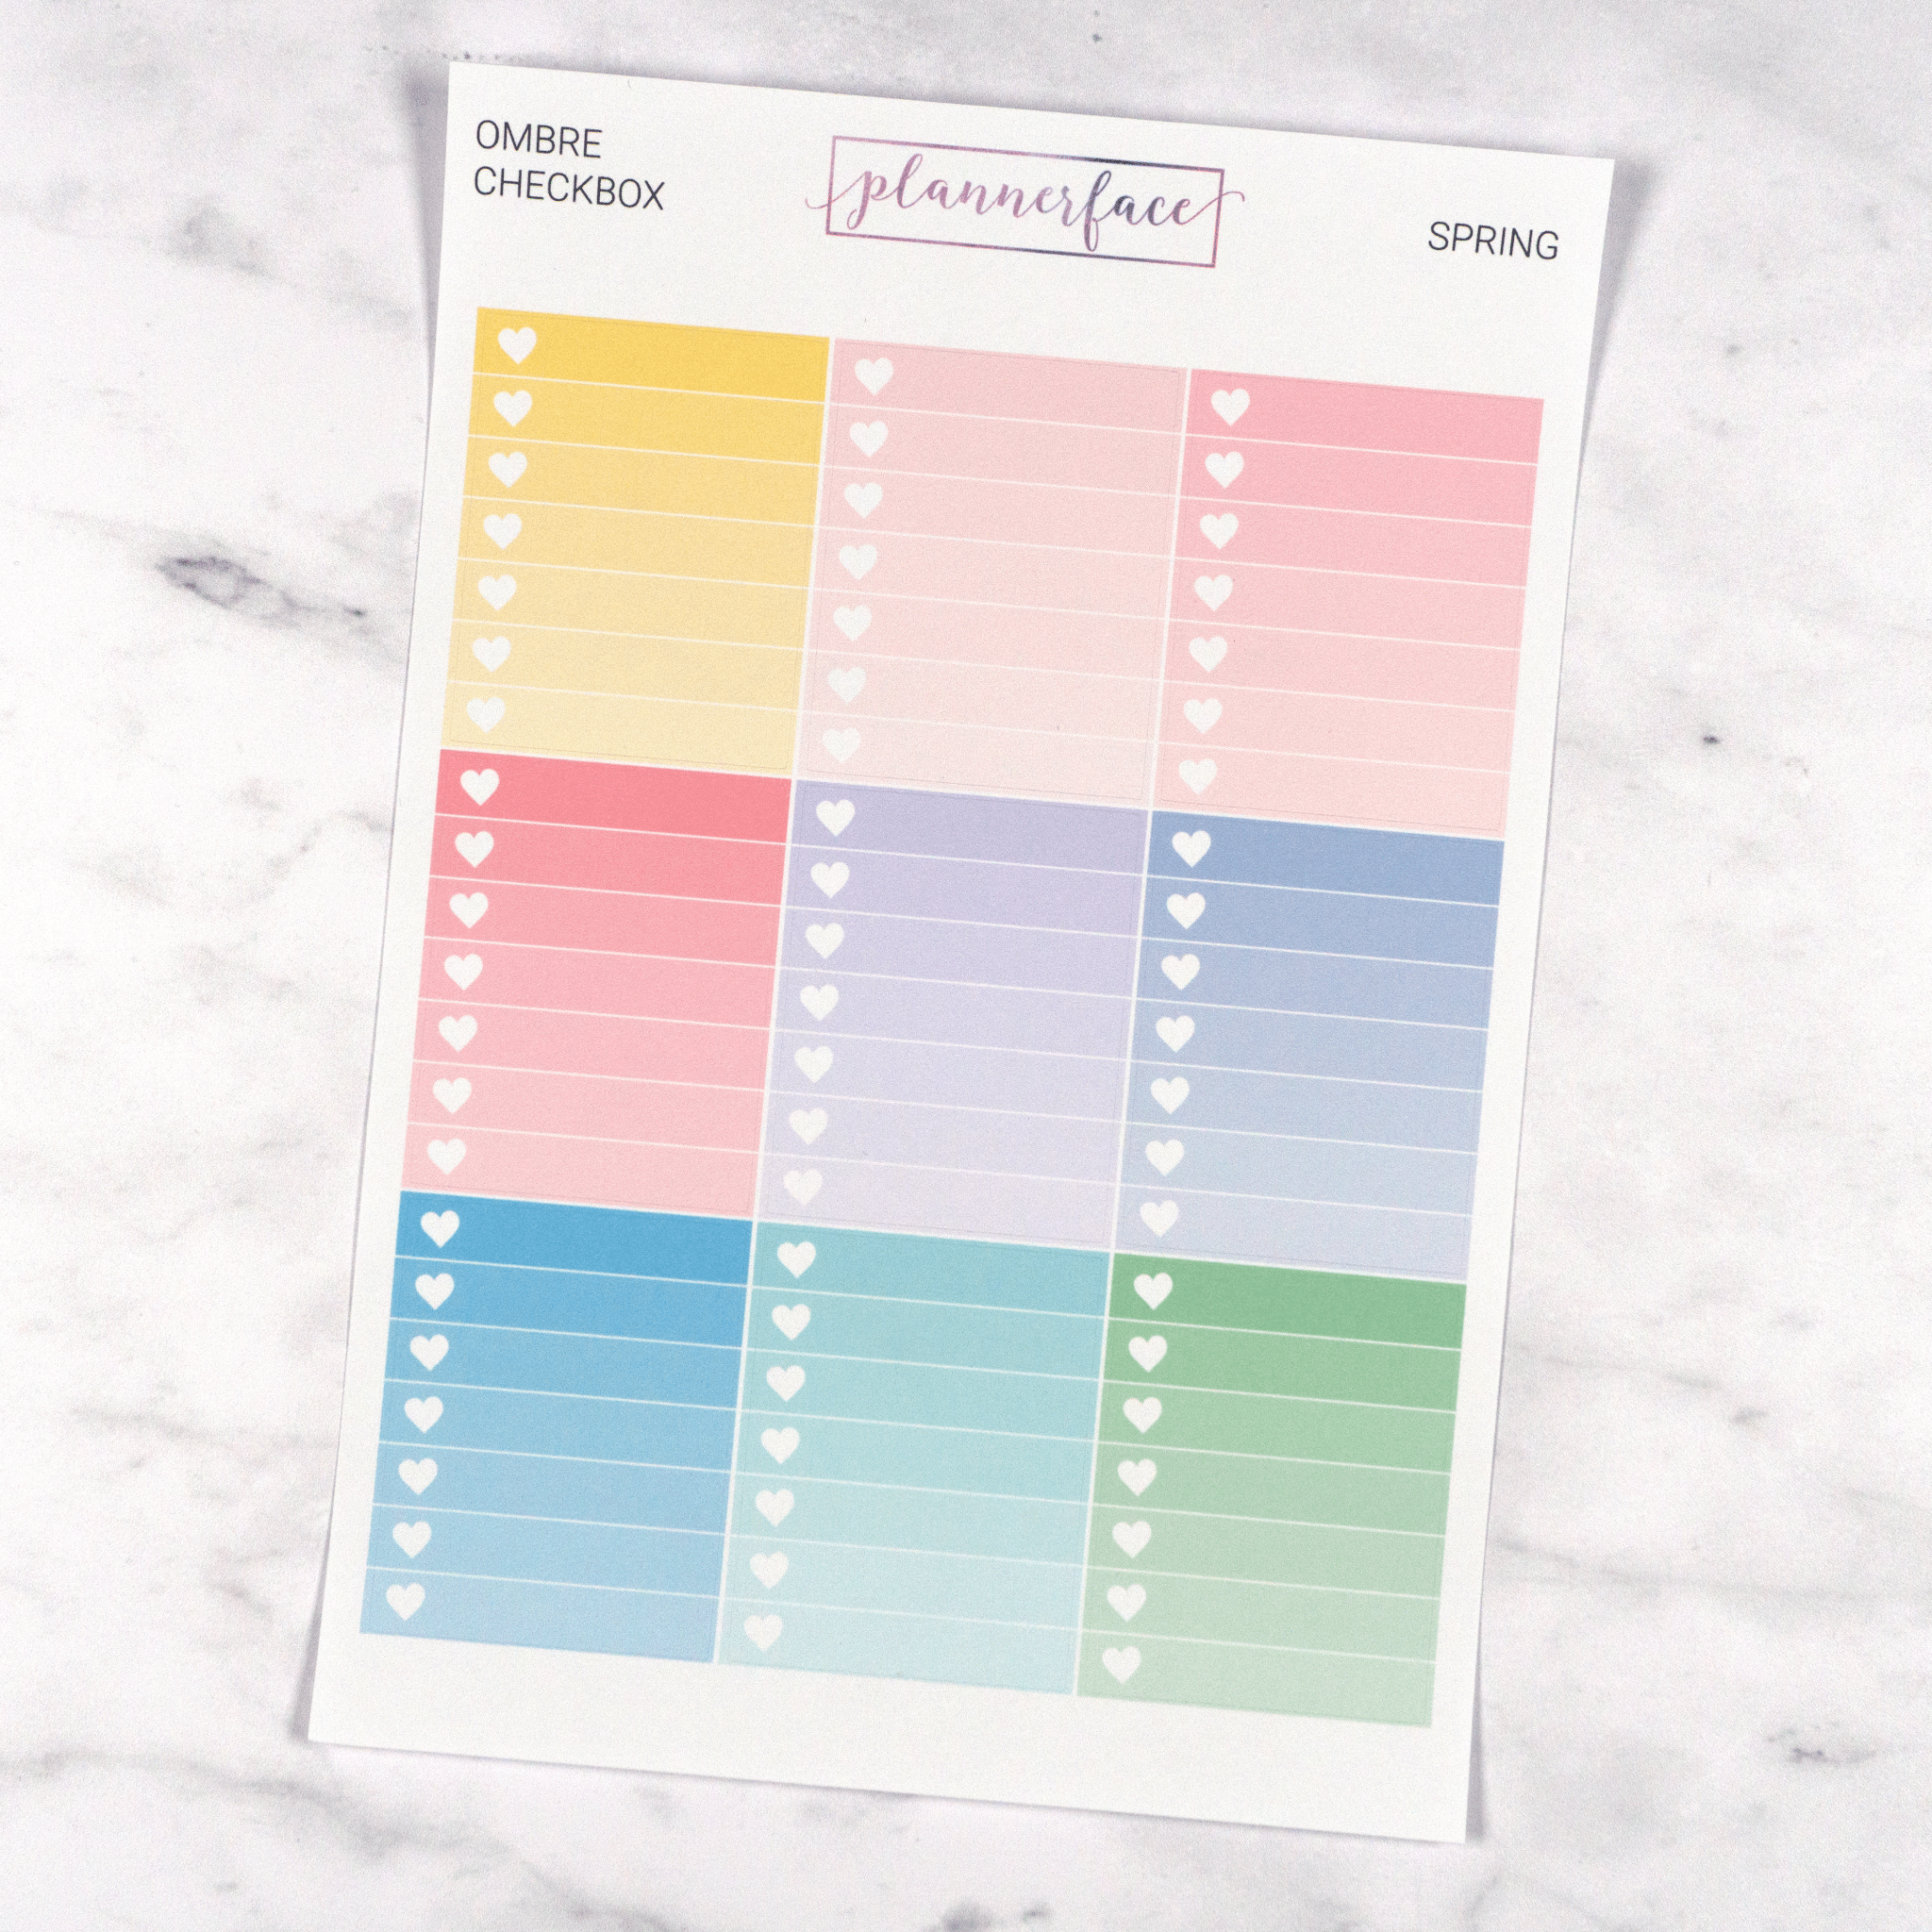 Ombre Heart Checkboxes | Spring by Plannerface